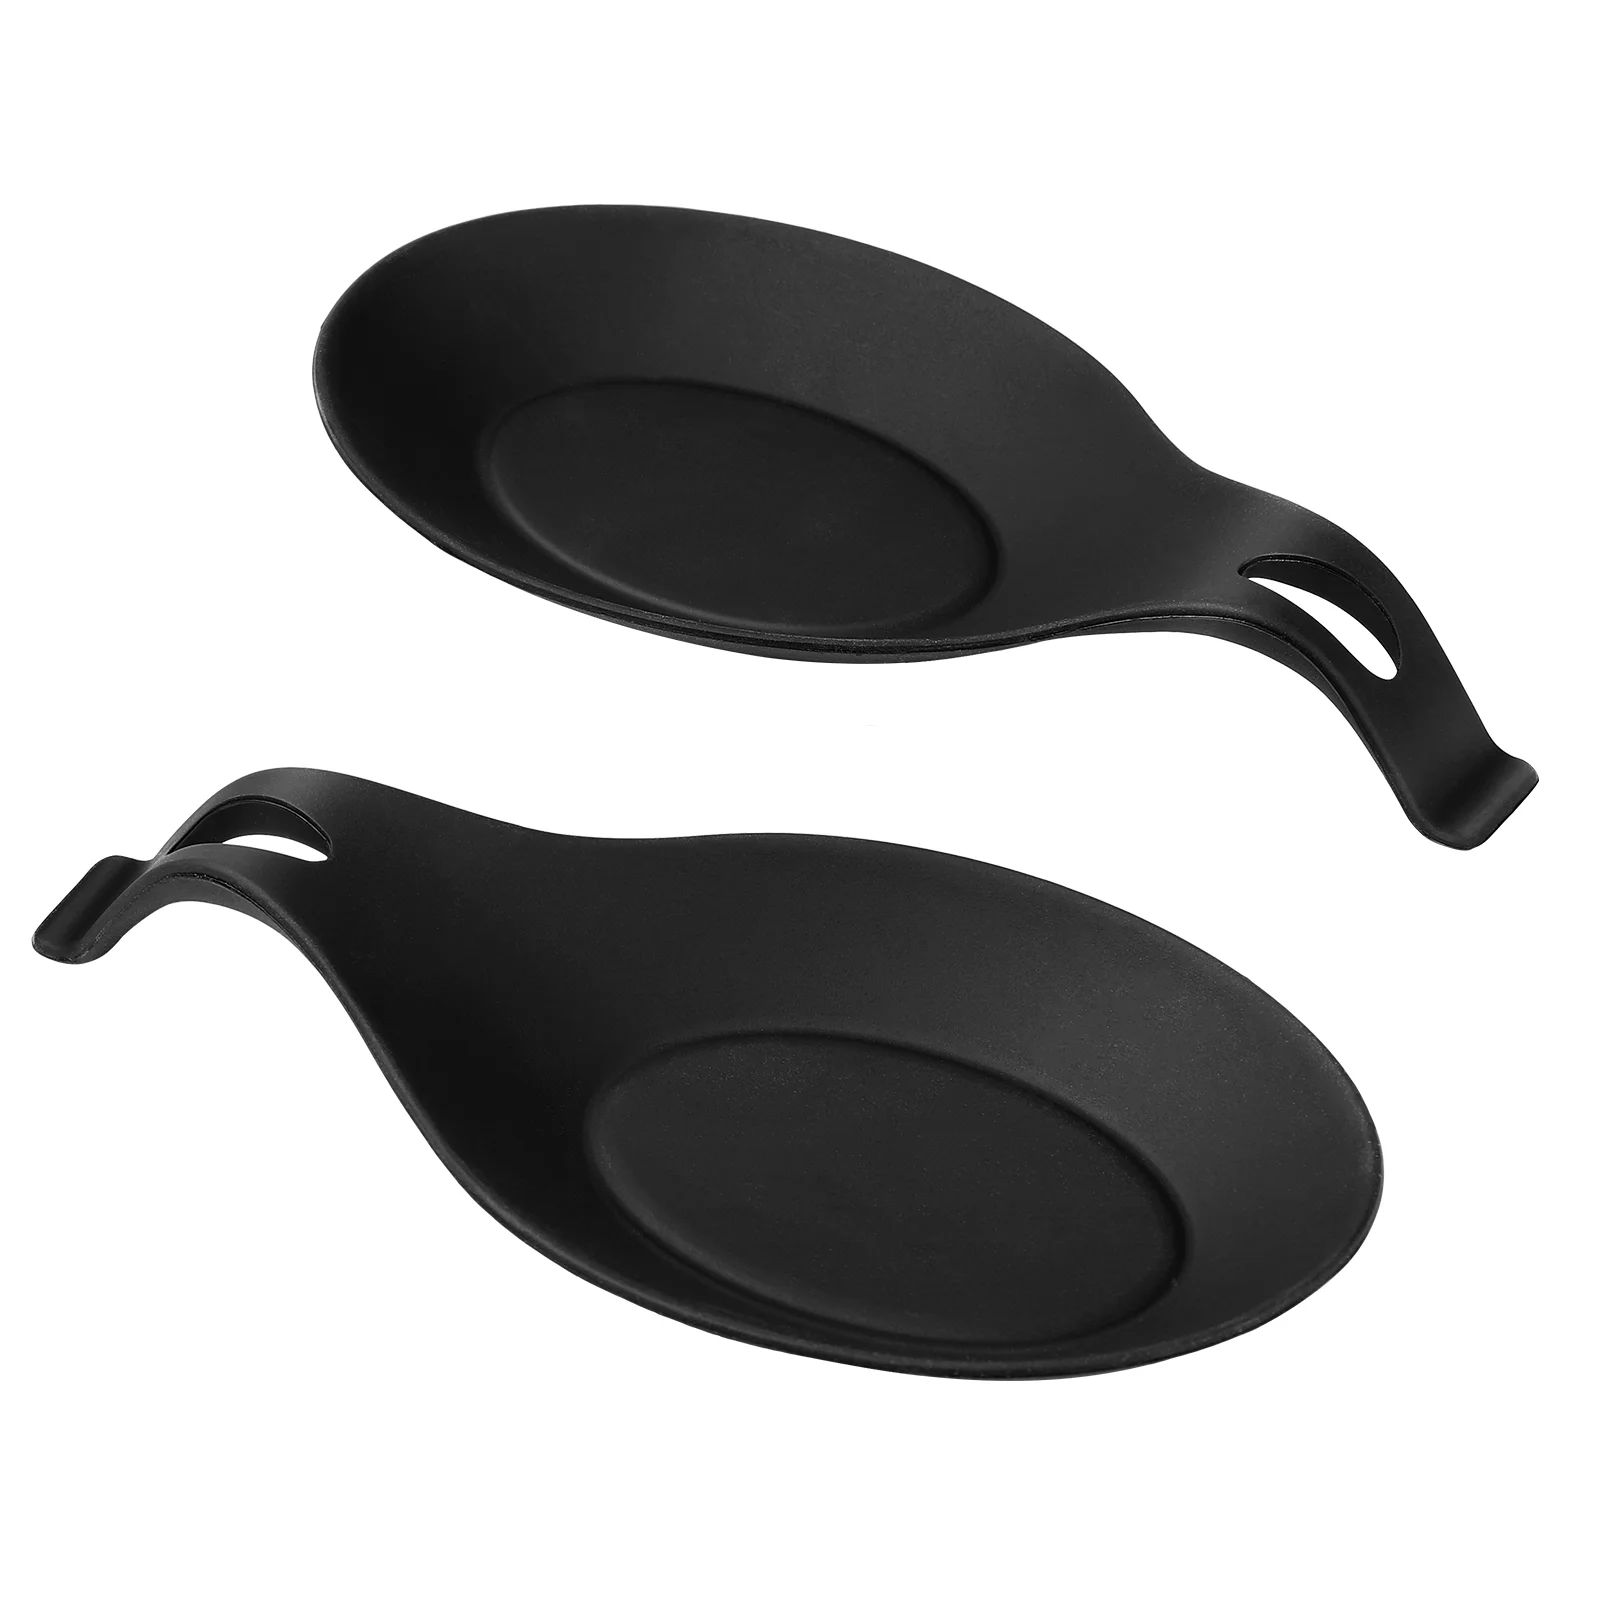 

Spoon Rest Holder Silicone Kitchen Stove Spatula Ladle Utensil Cooking Tea Mat Plates Countertop Utensils Lid Black Rests Heat